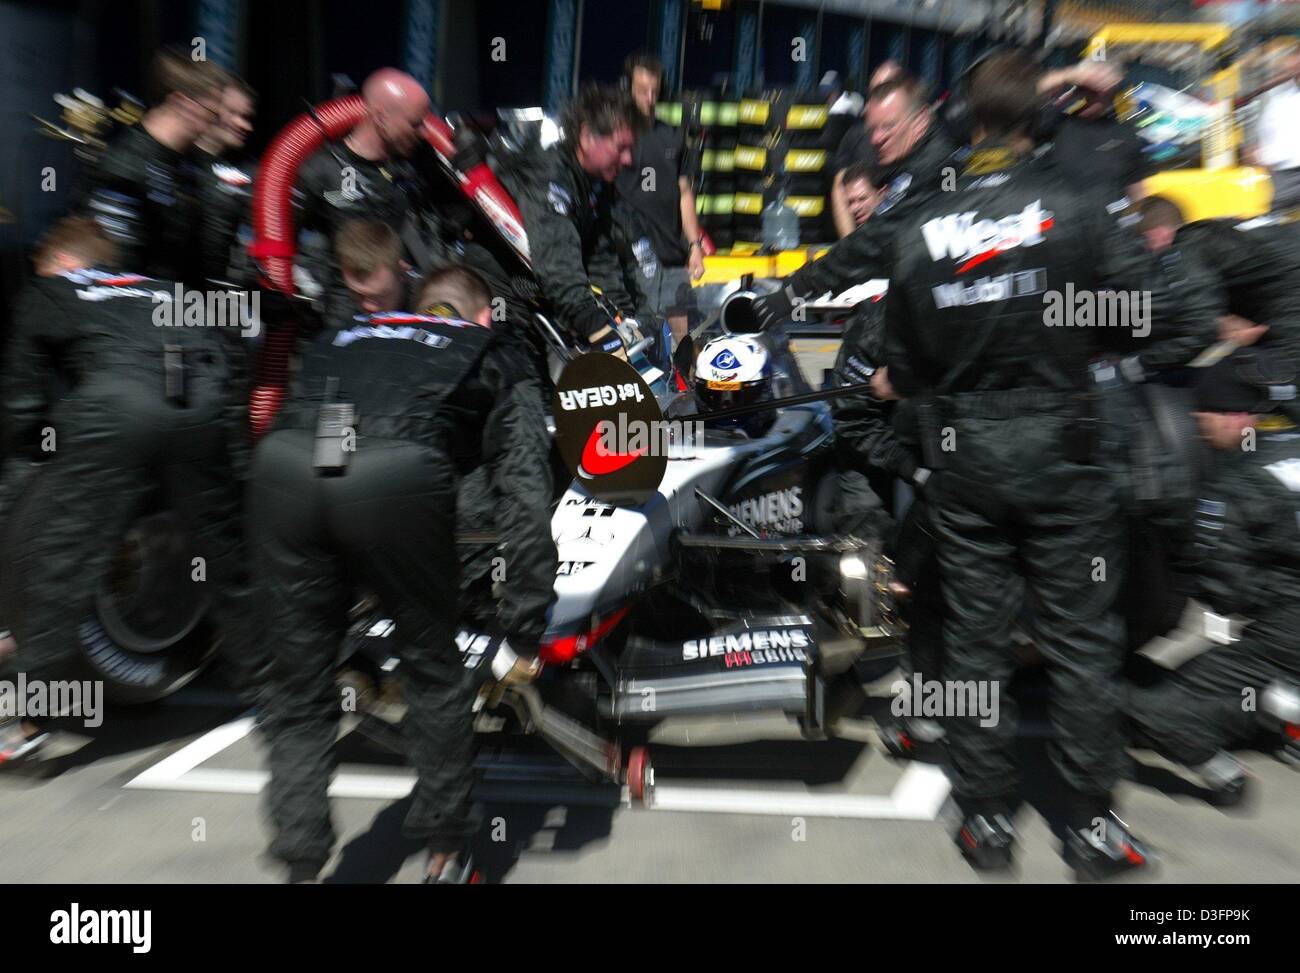 (dpa) - Mechanics of the McLaren Mercedes team rehearse a pit stop on the race track in Melbourne, Australia, 5 March 2003. The formula one season 2003 will open this weekend in Melbourne. Stock Photo